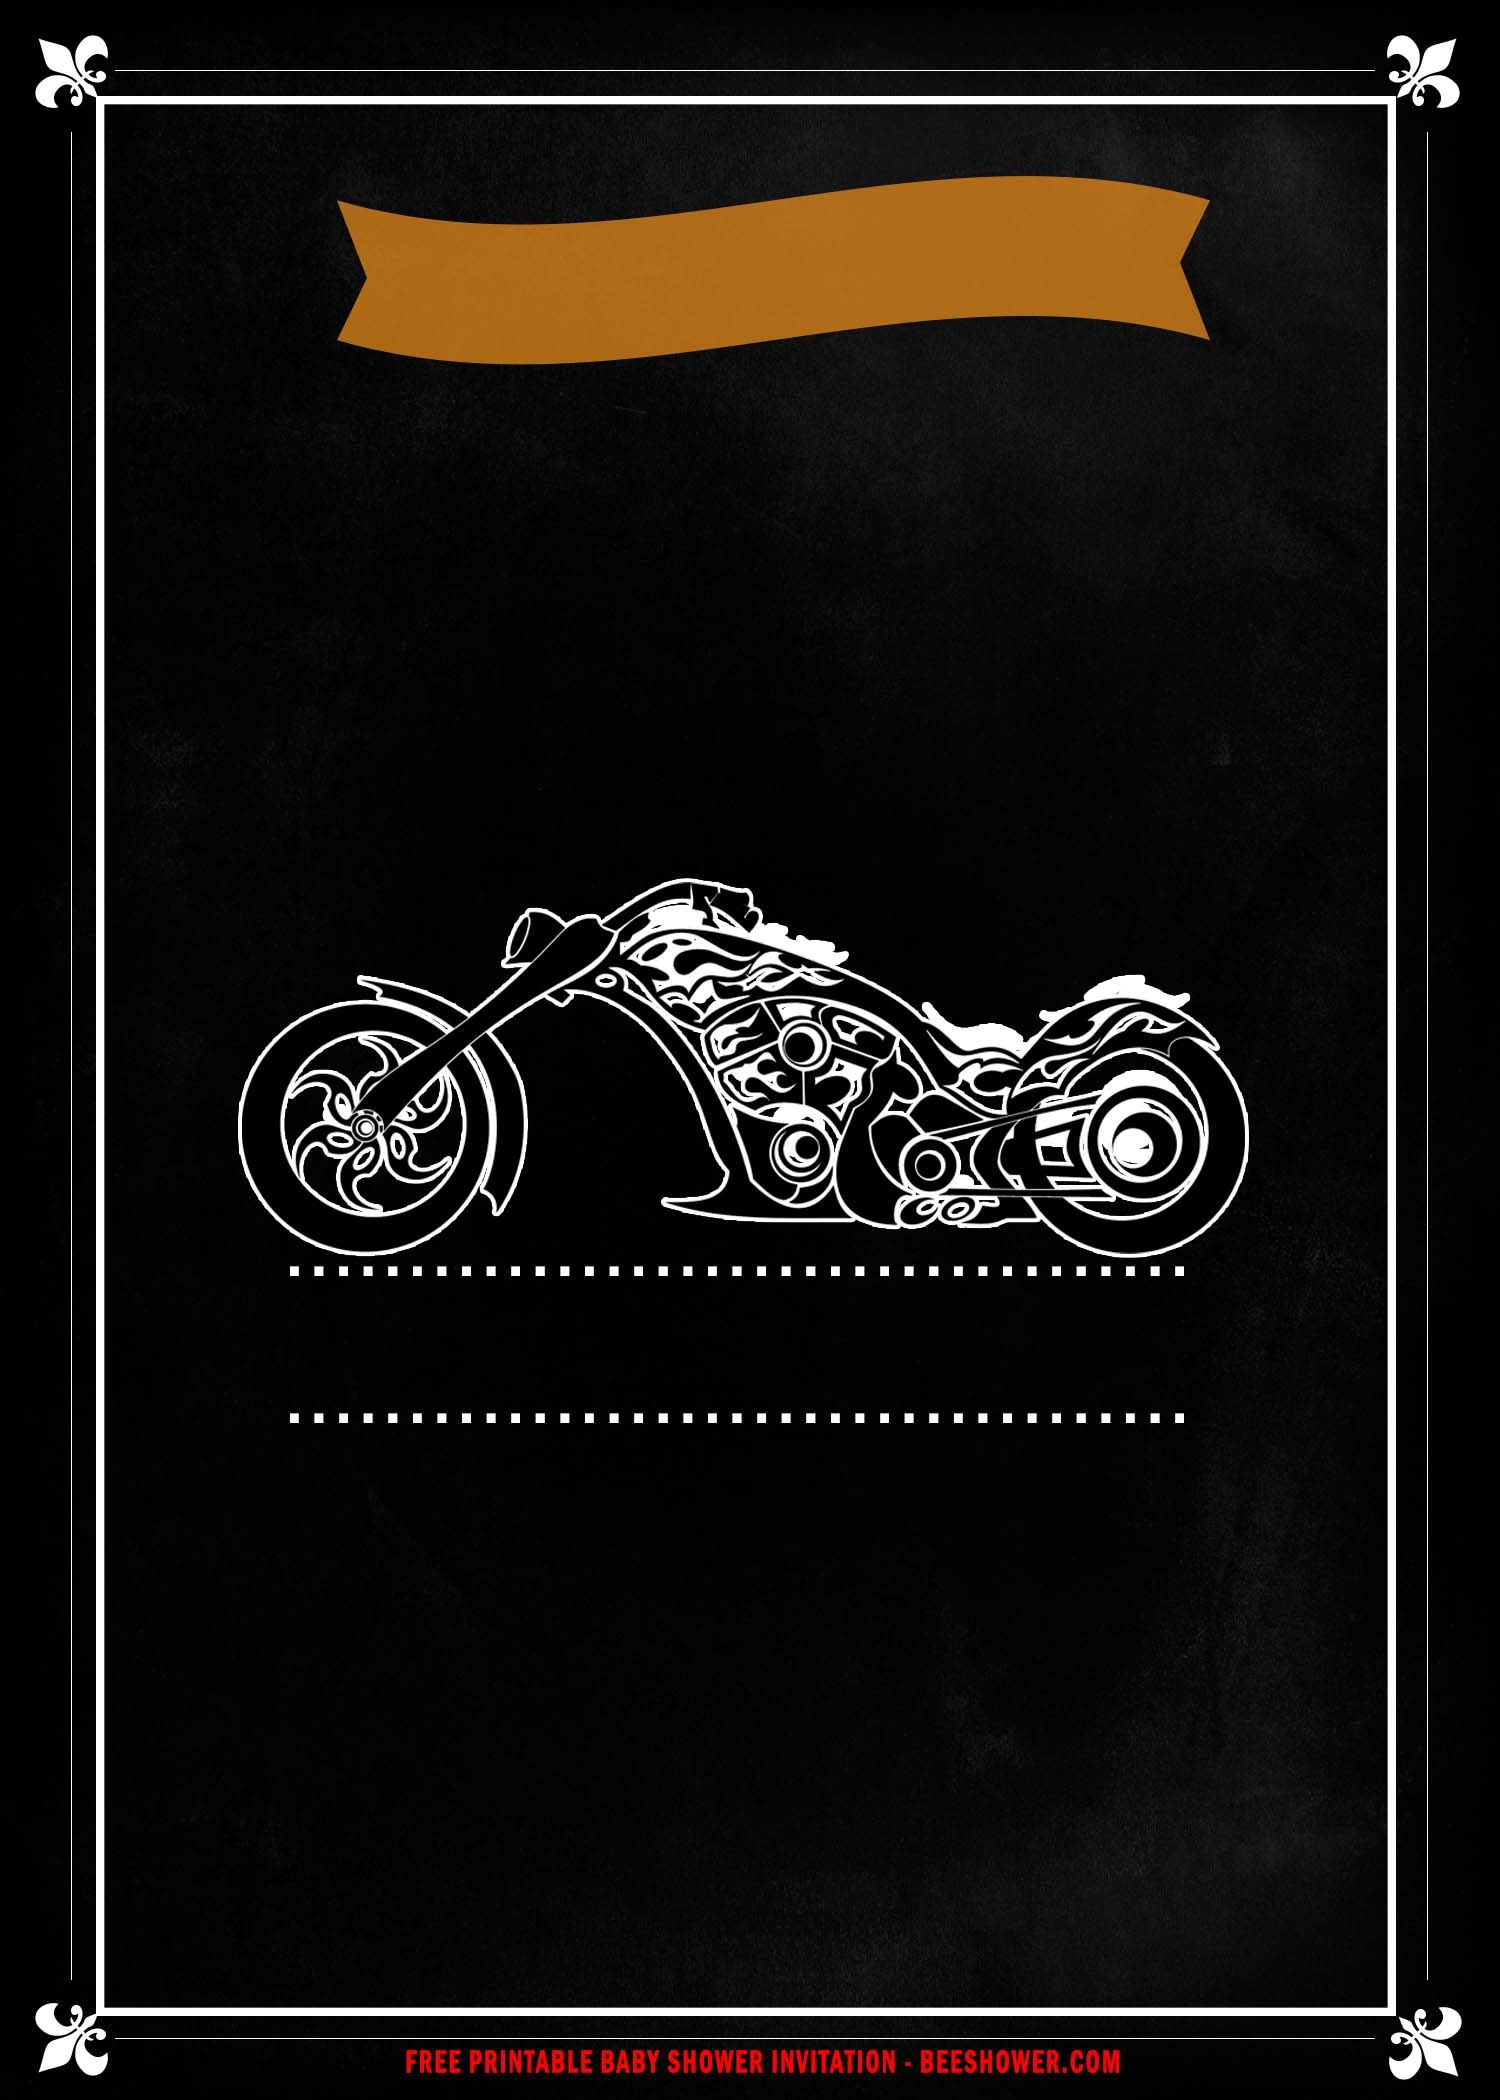 Free Printable) - Motorcycle Baby Shower Invitation Templates in Motorcycle Invitations Free Printable